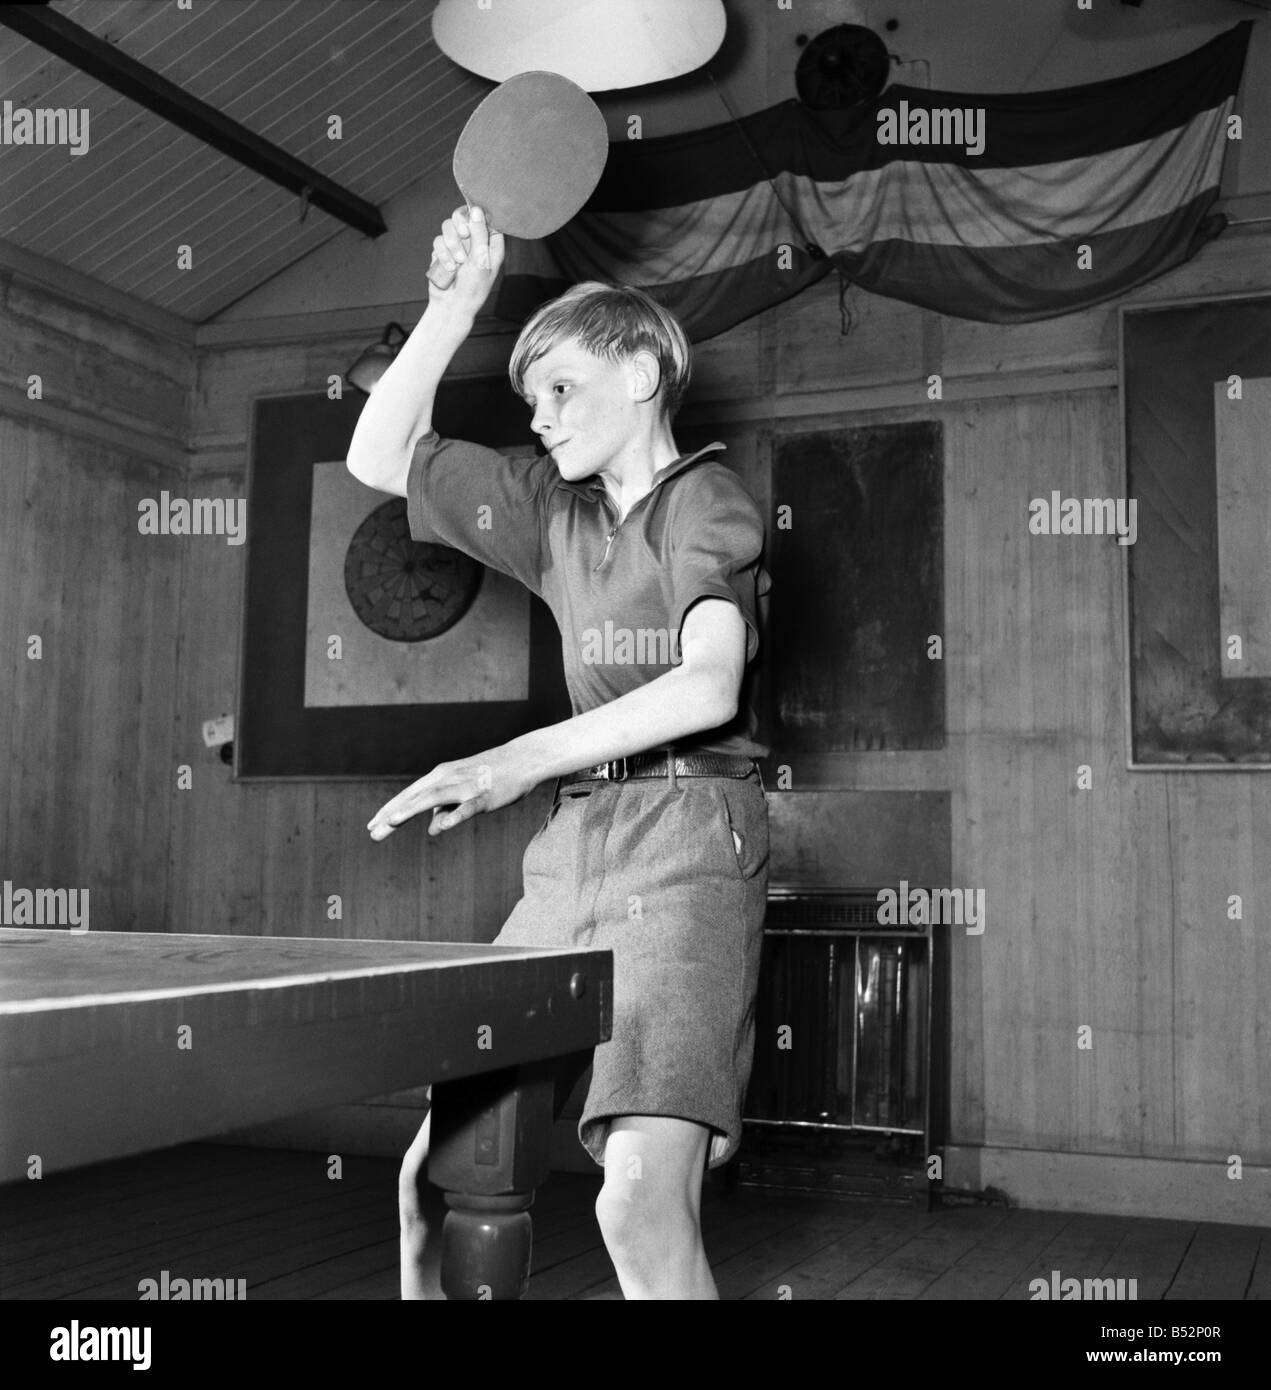 Lawrence Landry at Willesdon Green Table Tennis Club. February 1953 ...